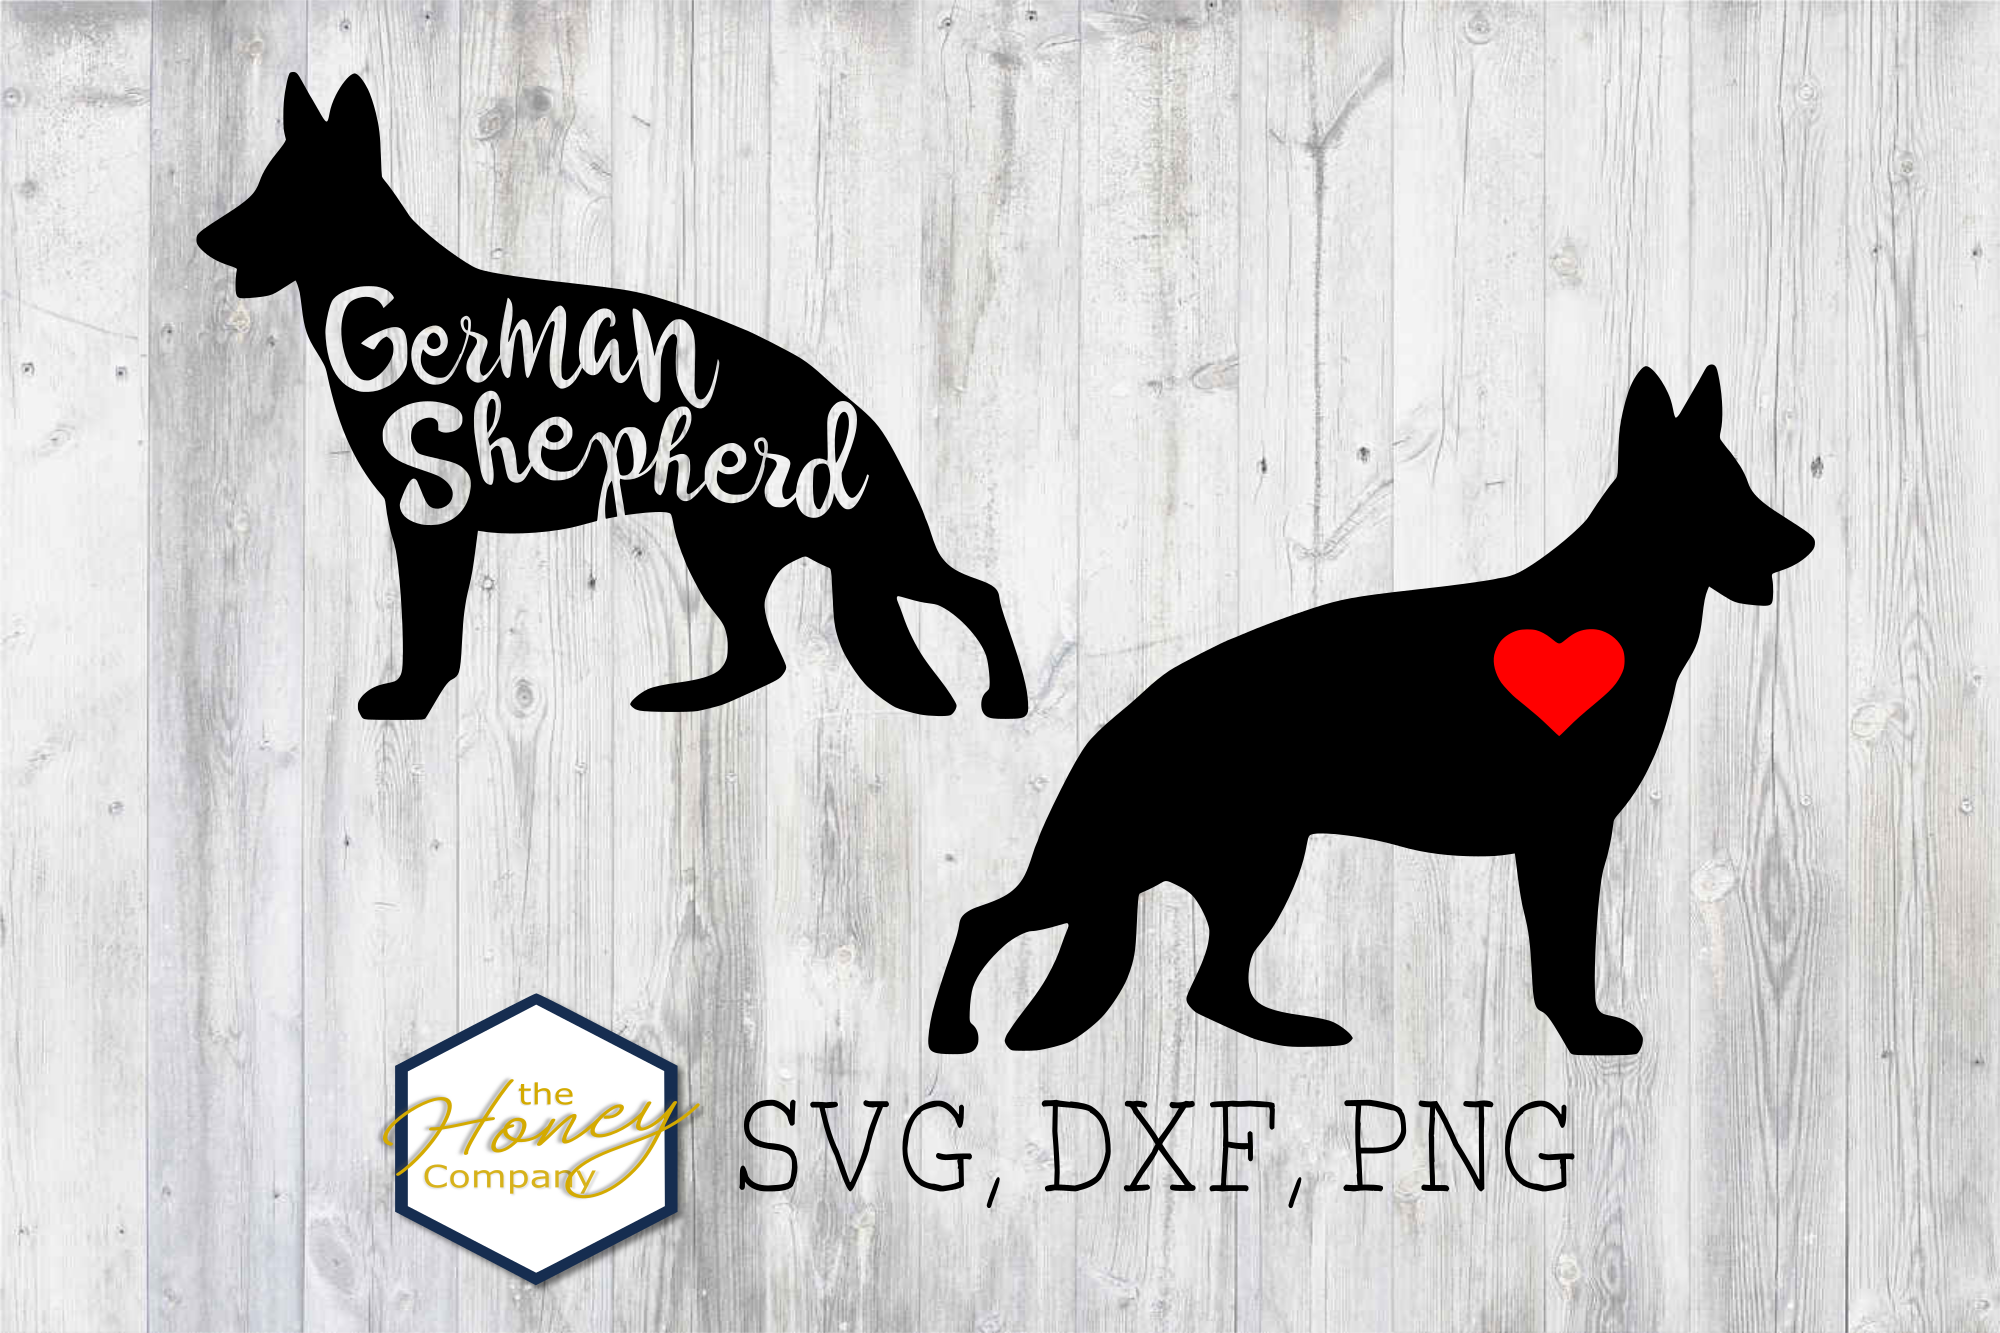 German Shepherd SVG PNG DXF Dog Breed Lover Cut File Clipart (277280